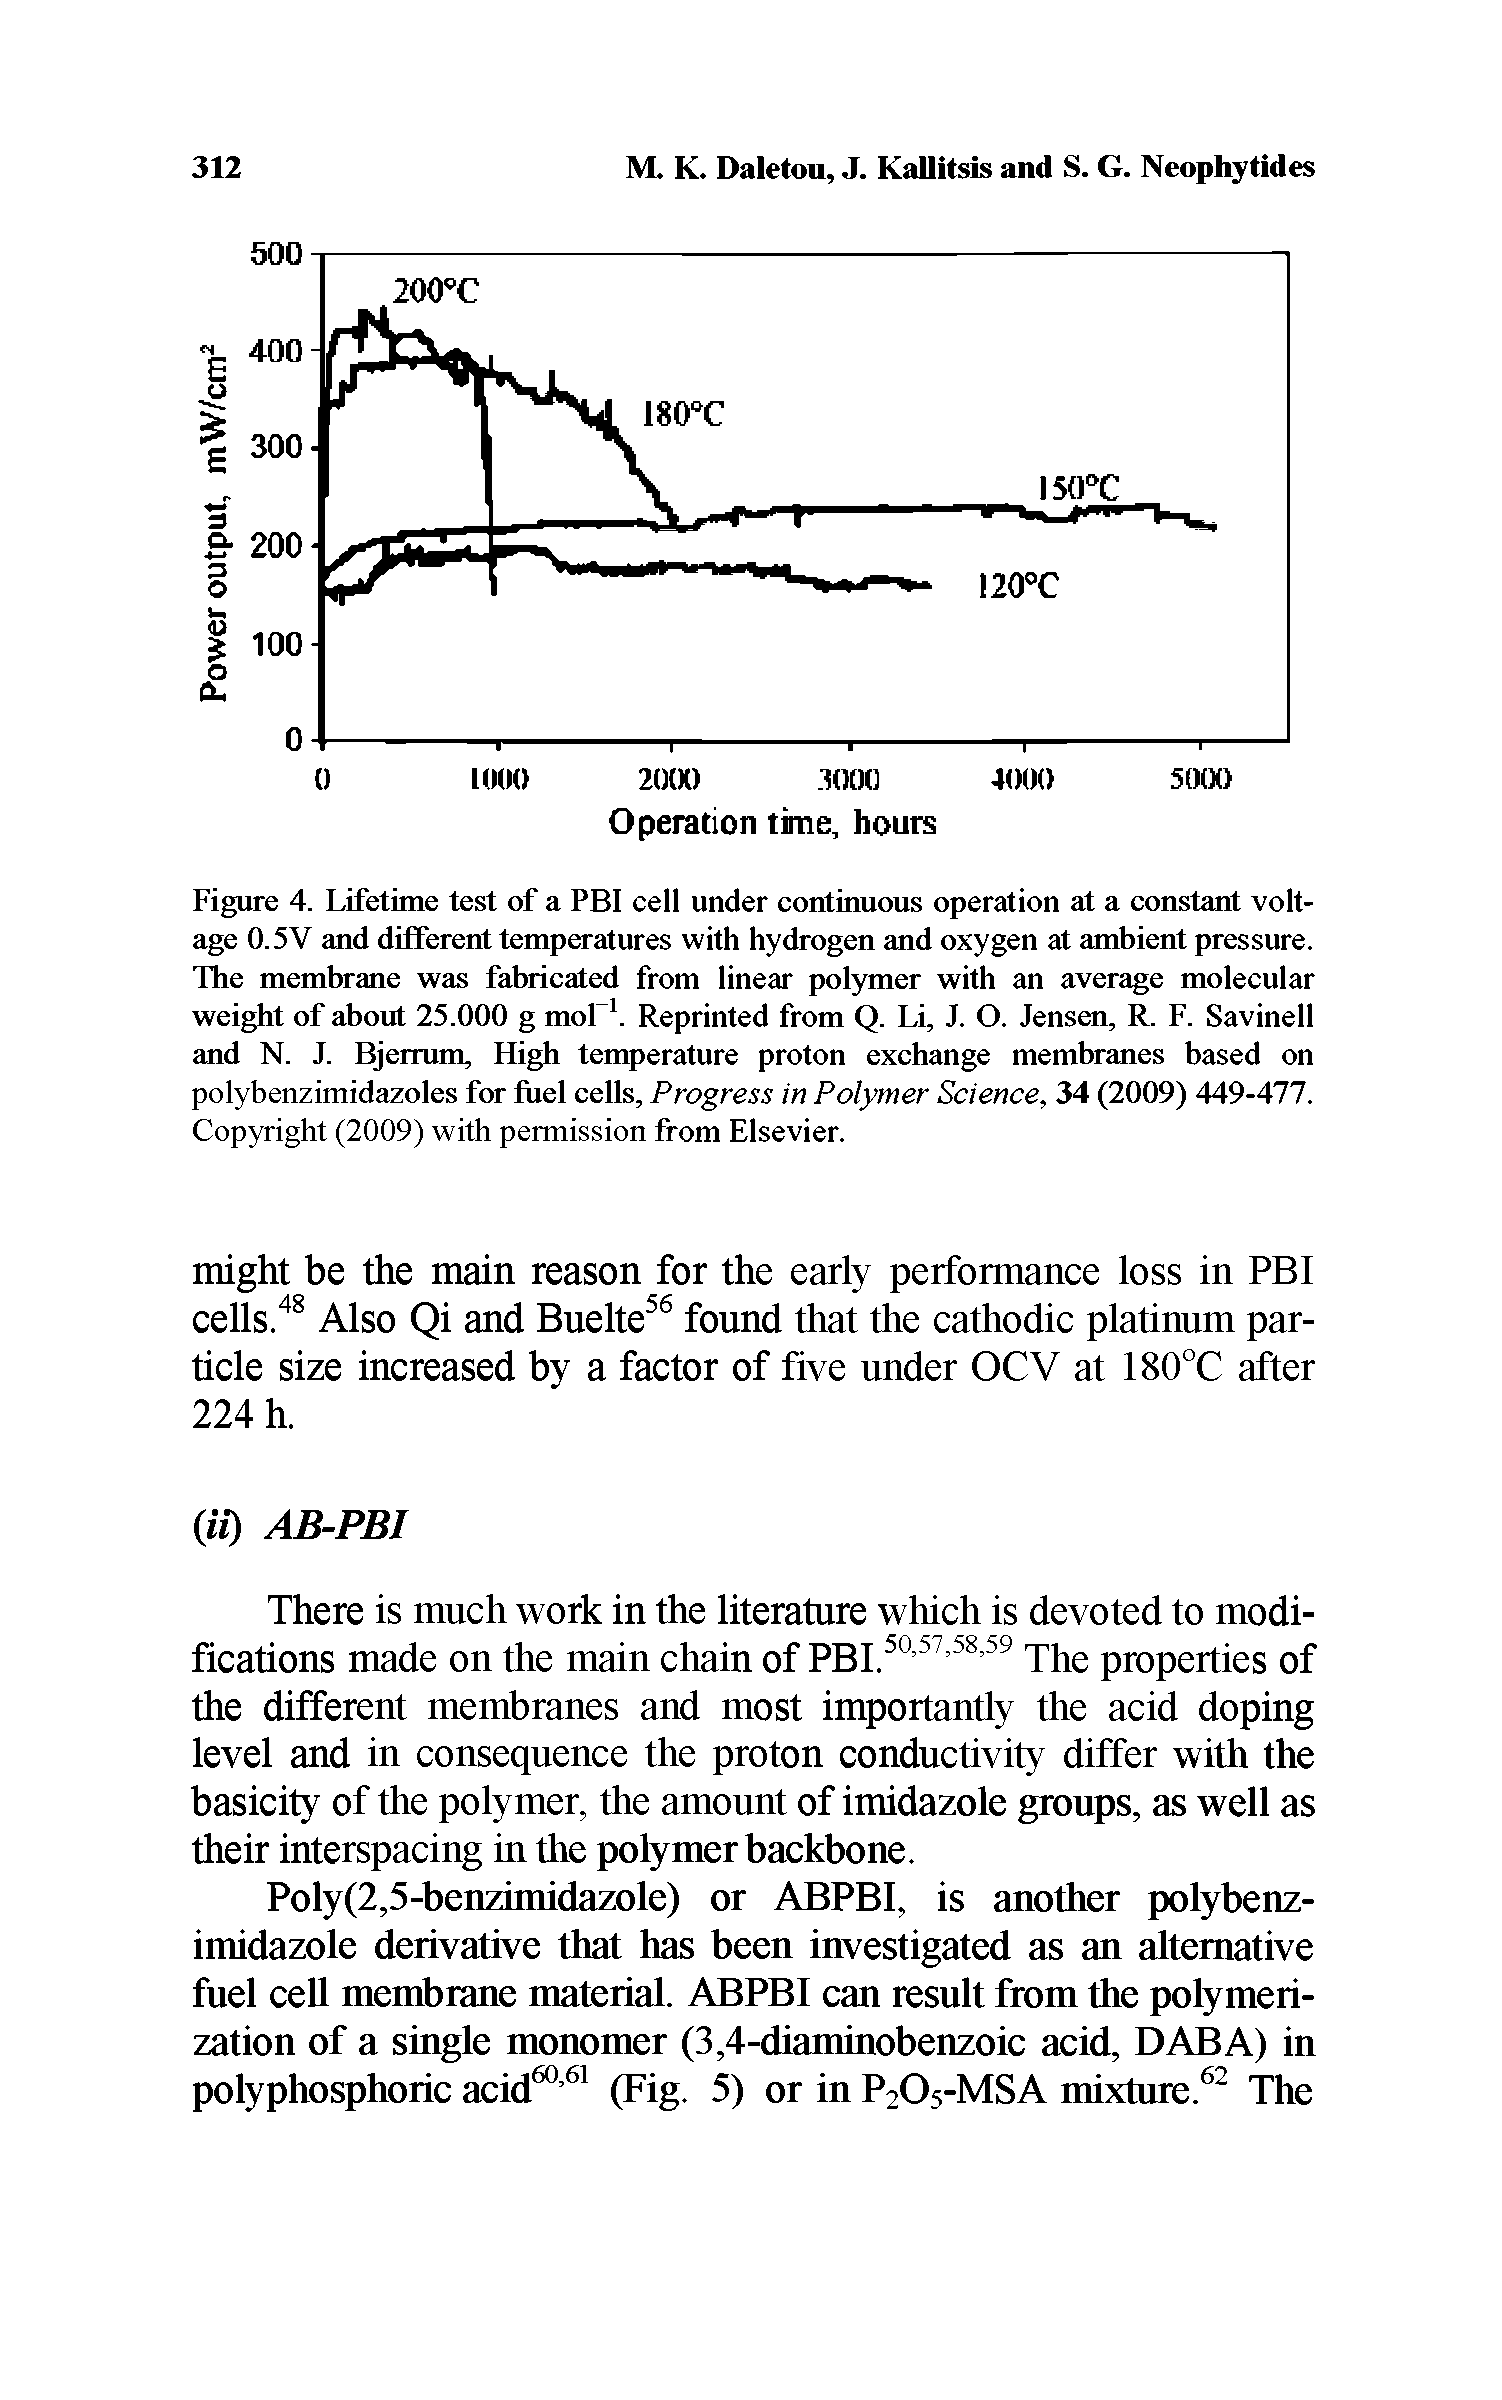 Figure 4. Lifetime lest of a FBI cell under continuous operation at a constant voltage 0.5V and different temperatures with hydrogen and oxygen at ambient pressure. The membrane was fabrieated from linear polymer with an average molecular weight of about 25.000 g mol. Reprinted from Q. Li, J. O. Jensen, R. F. Savinell and N. J. Bjerrum, High temperature proton exchange membranes based on polybenzimidazoles for fuel eells. Progress in Polymer Science, 34 (2009) 449-477. Copyright (2009) with permission from Elsevier.